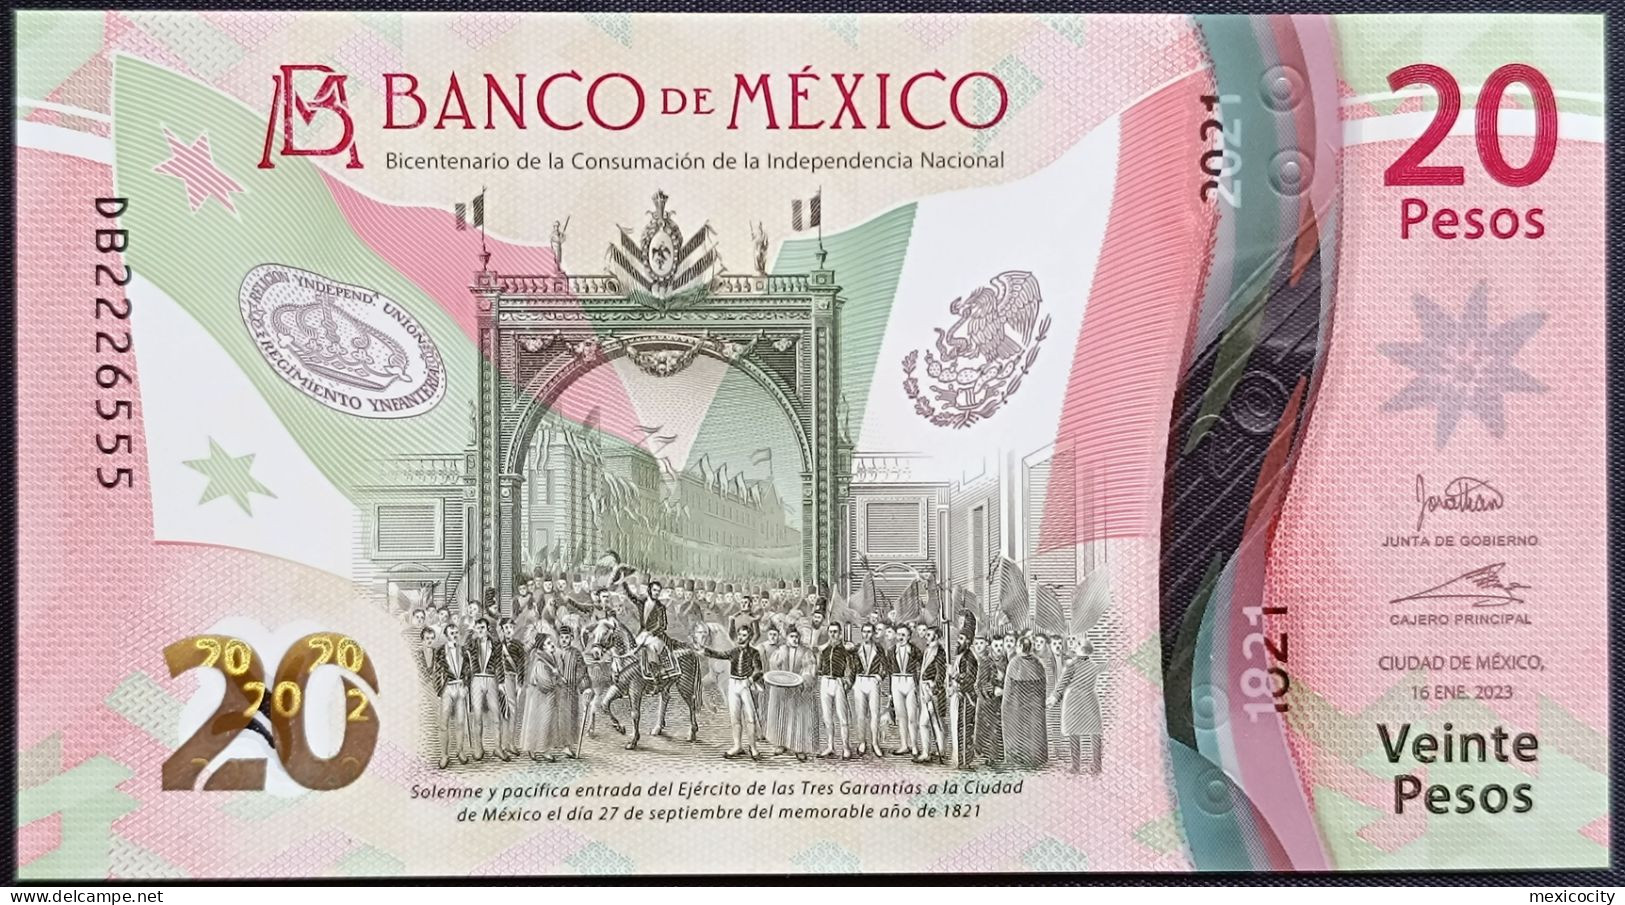 MEXICO $20 SERIES DB2226555 DOUBLE ANGEL # - 16-JAN-2023 INDEPENDENCE POLYMER NOTE BU Mint Crisp - México